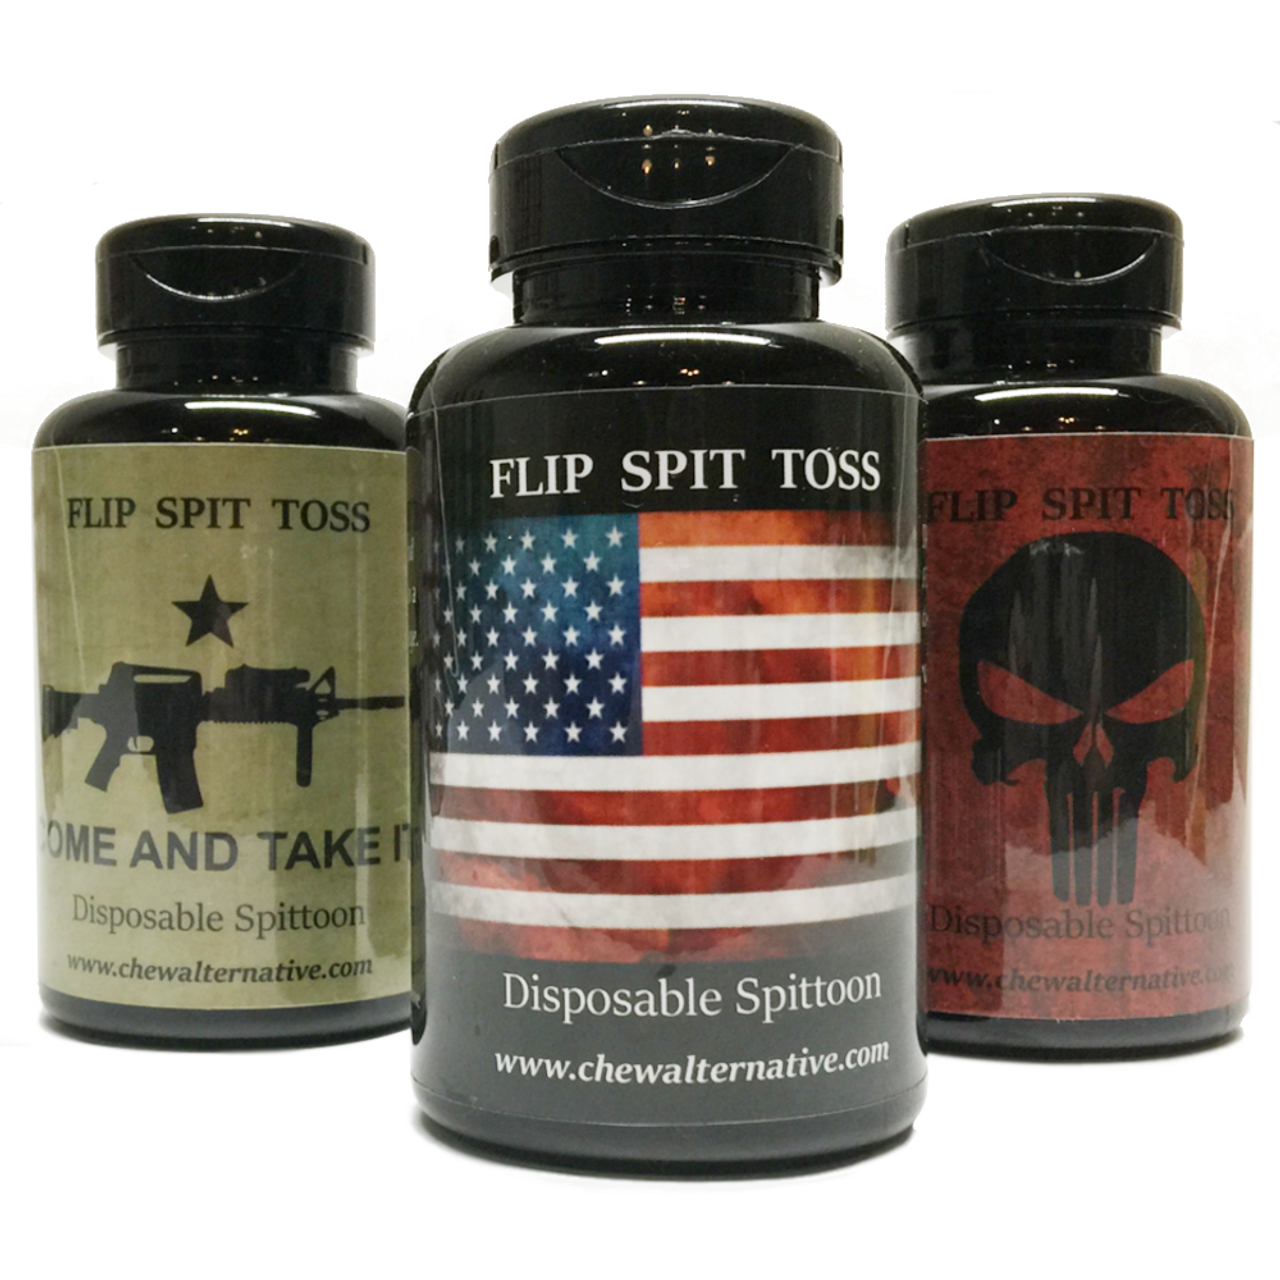 Mud Bud Disposable Spittoon 3 Pack - Come And Take It, US Flag, and Punisher